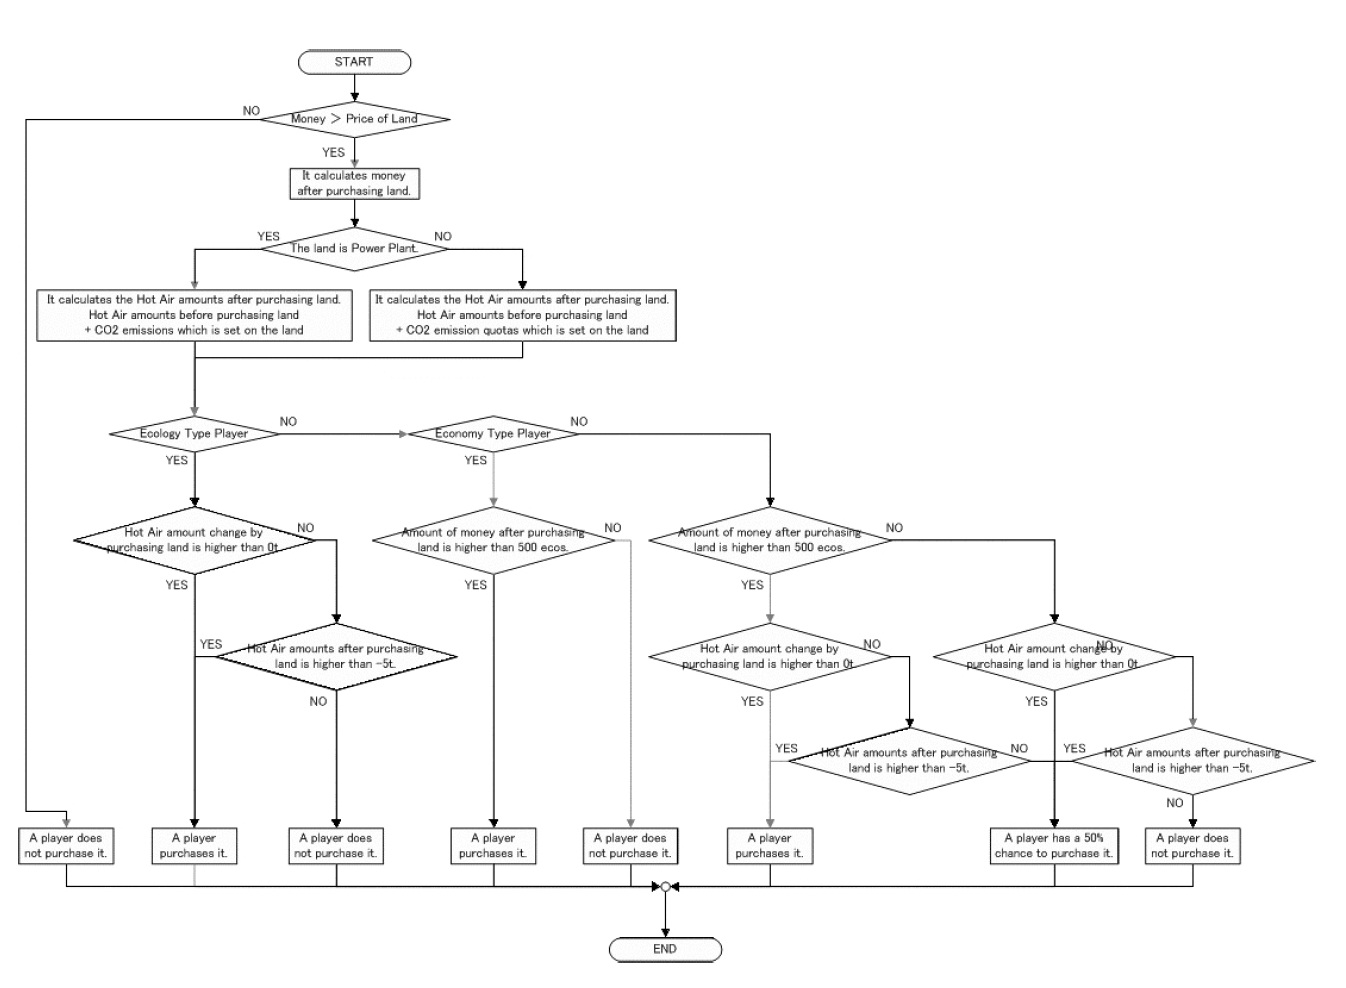 Flow Chart with the Developed Decision-Making Algorithms for Purchasing Land.